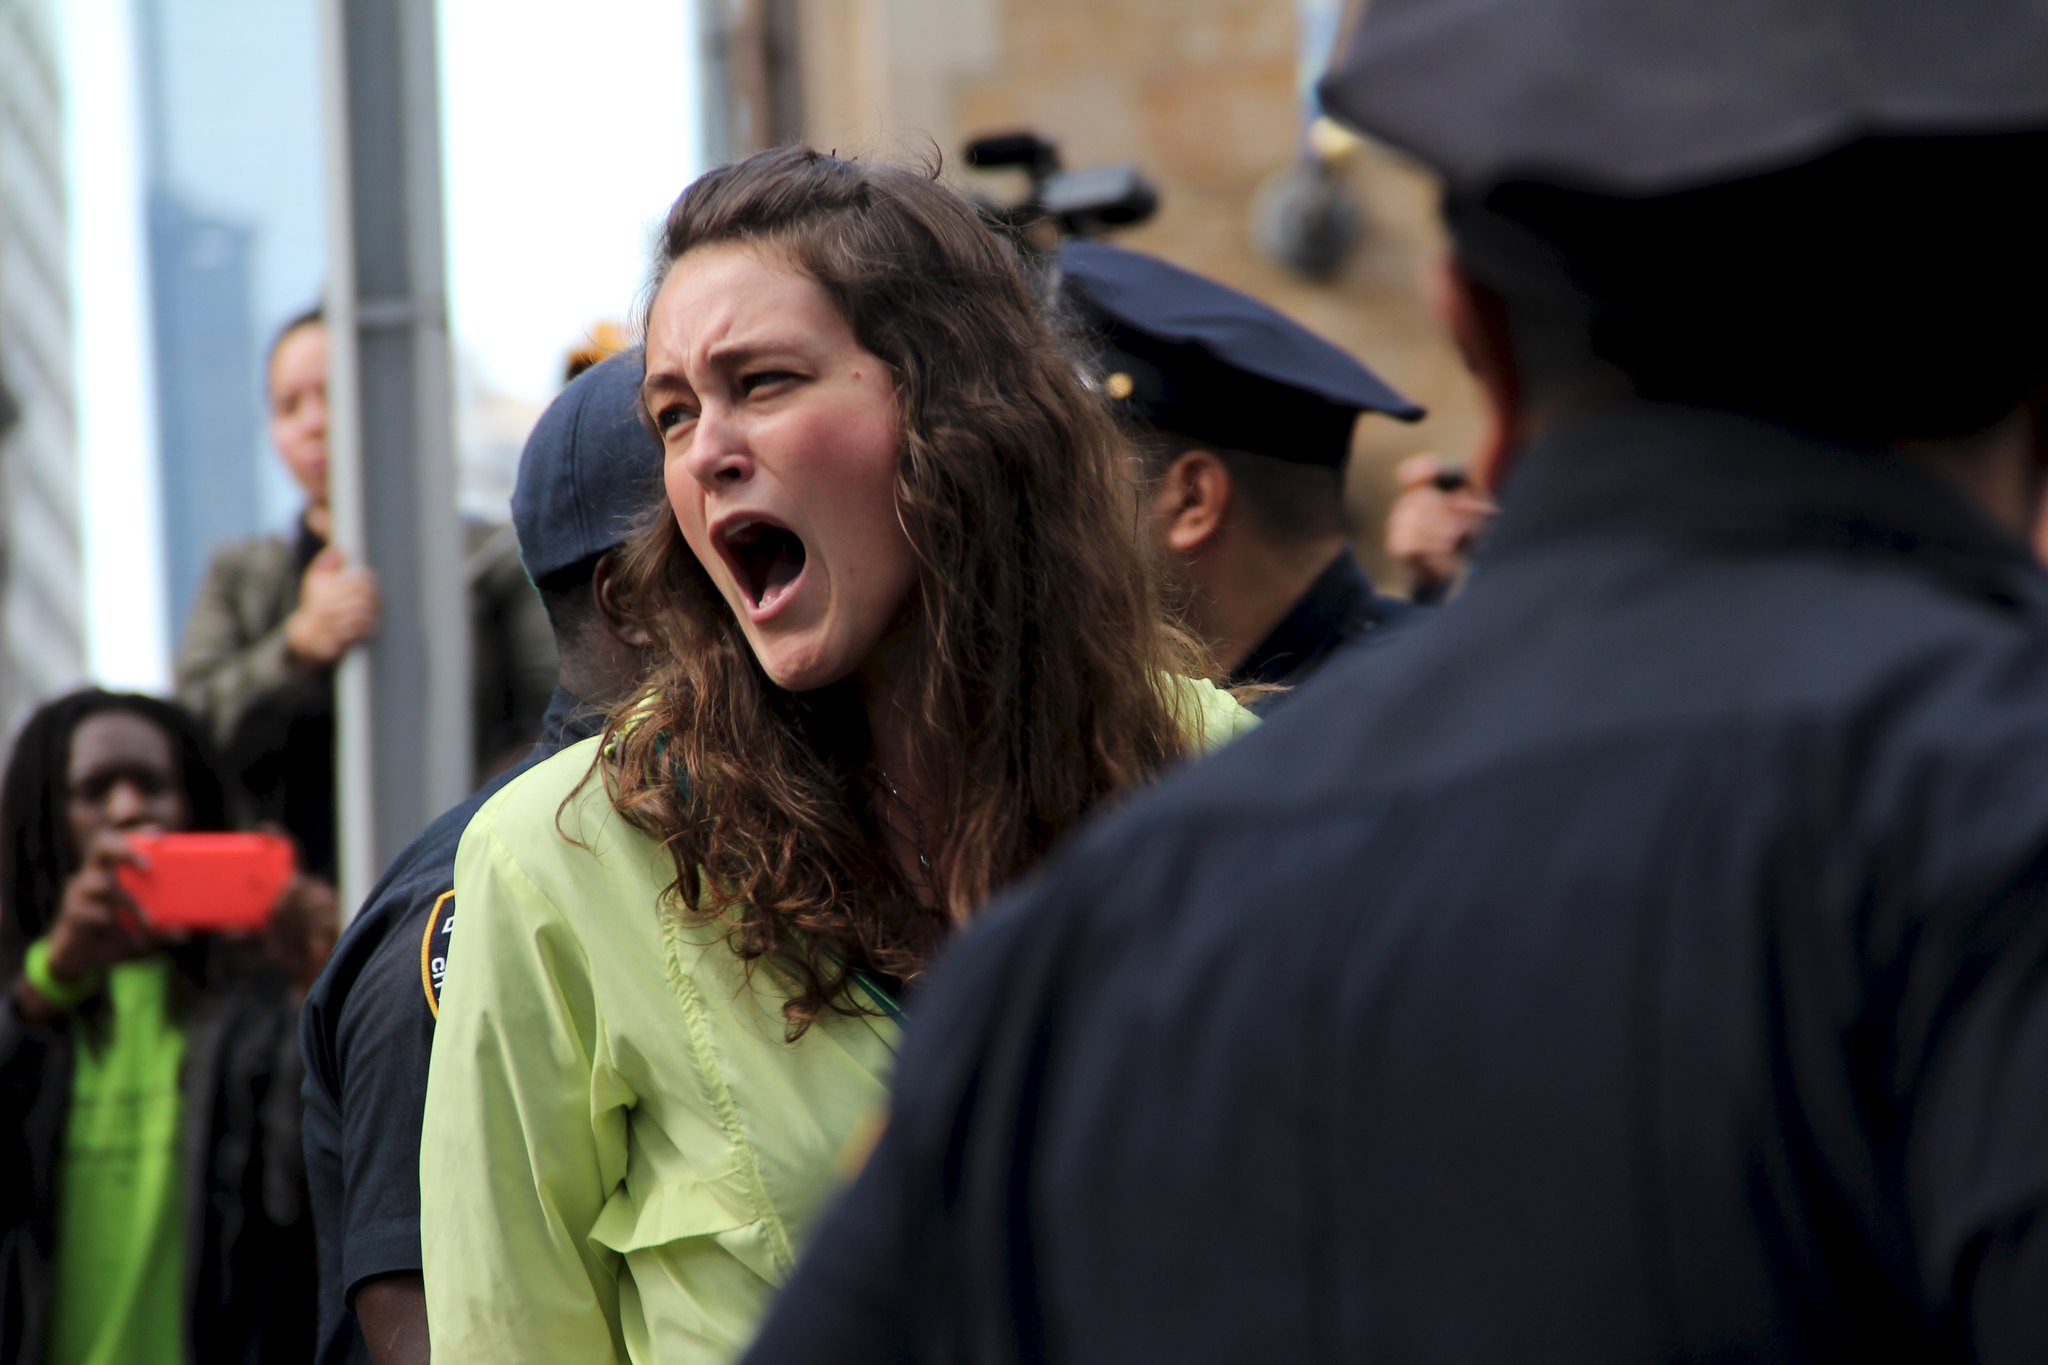 A protester surrounding by police officers.